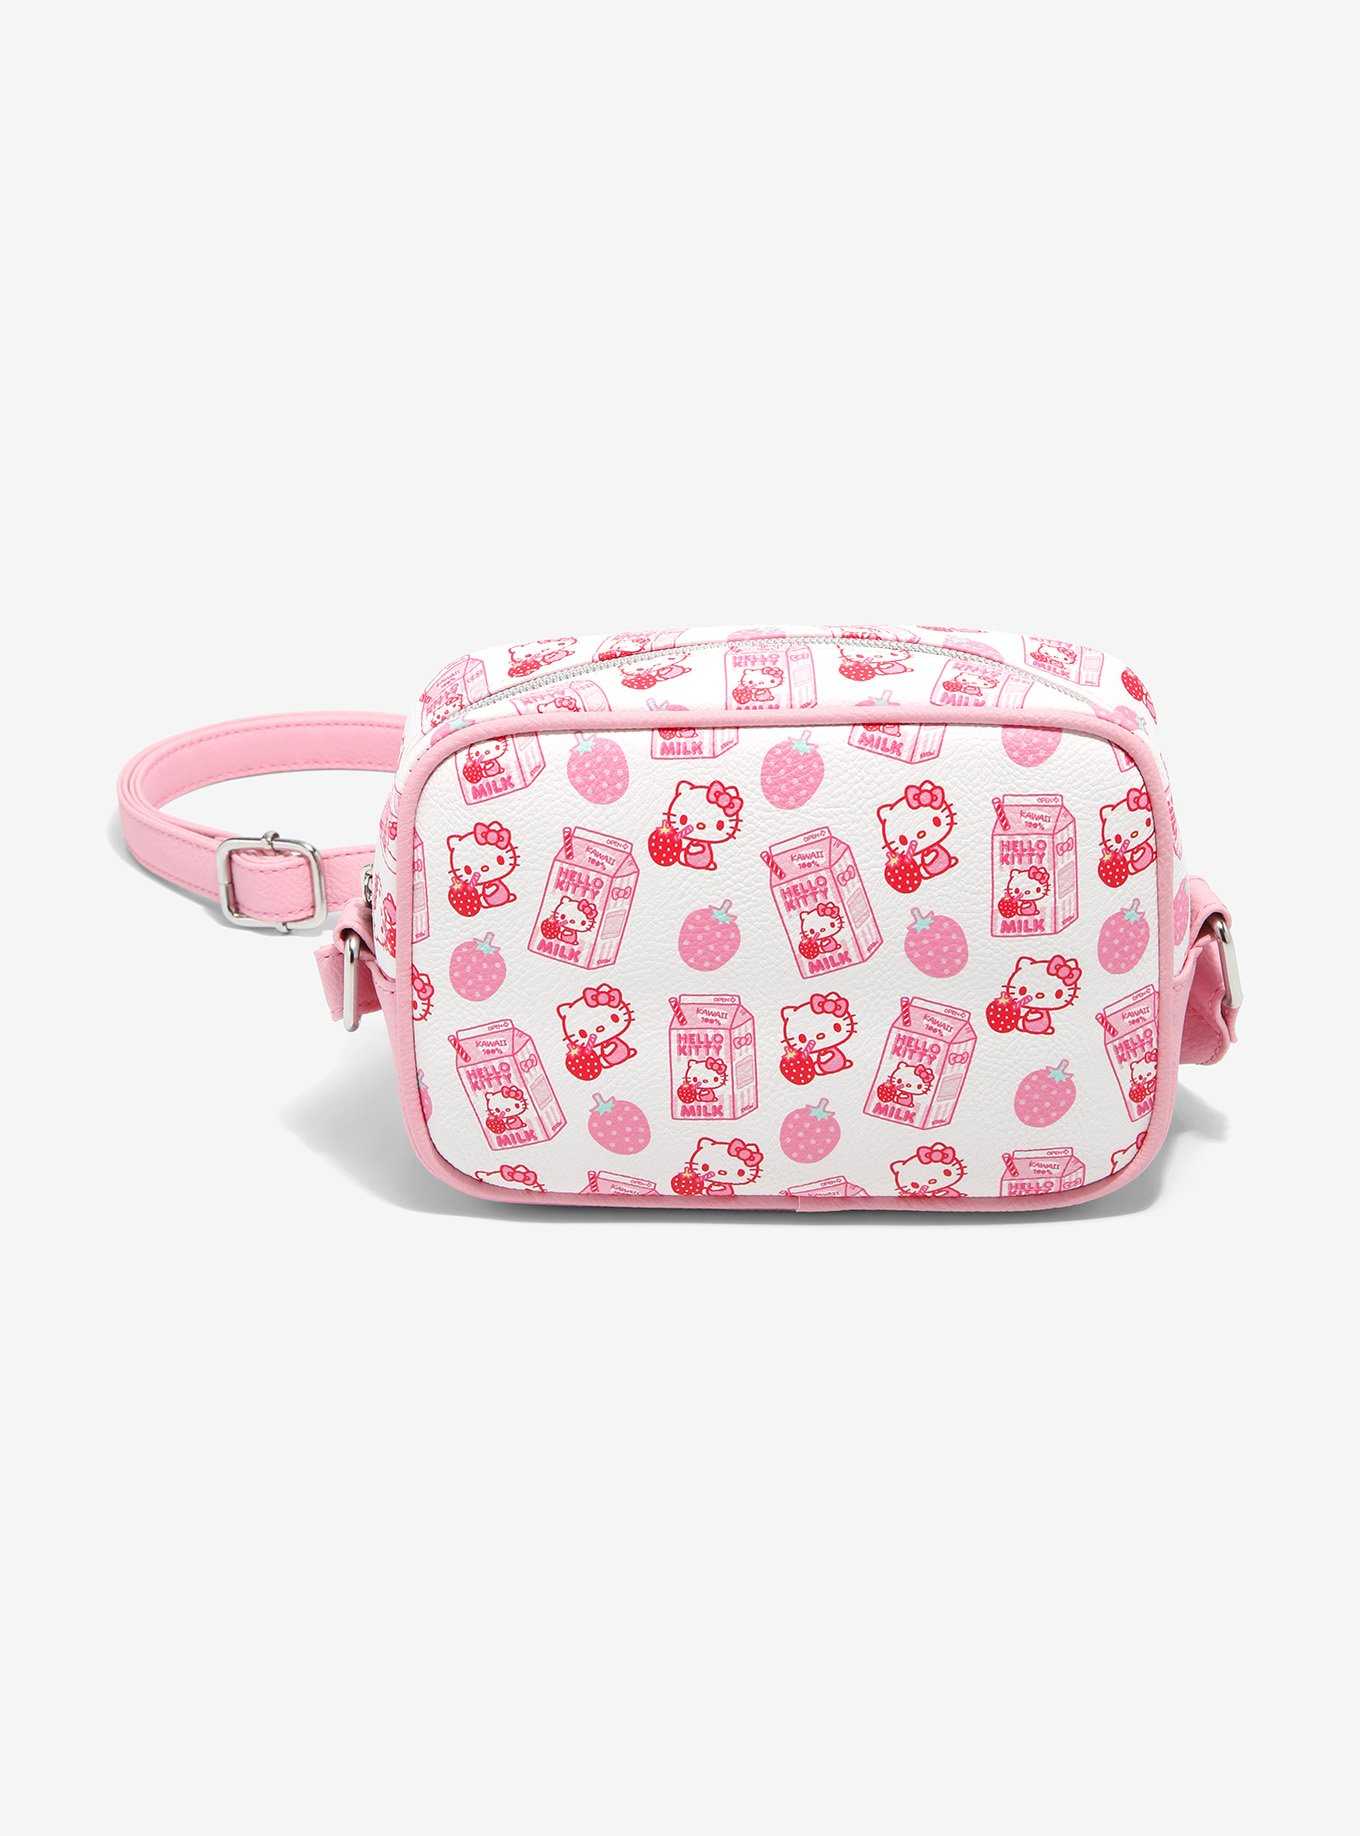 Be Right Back Diaper Bag - Hello Kitty - Strawberry Stripes 